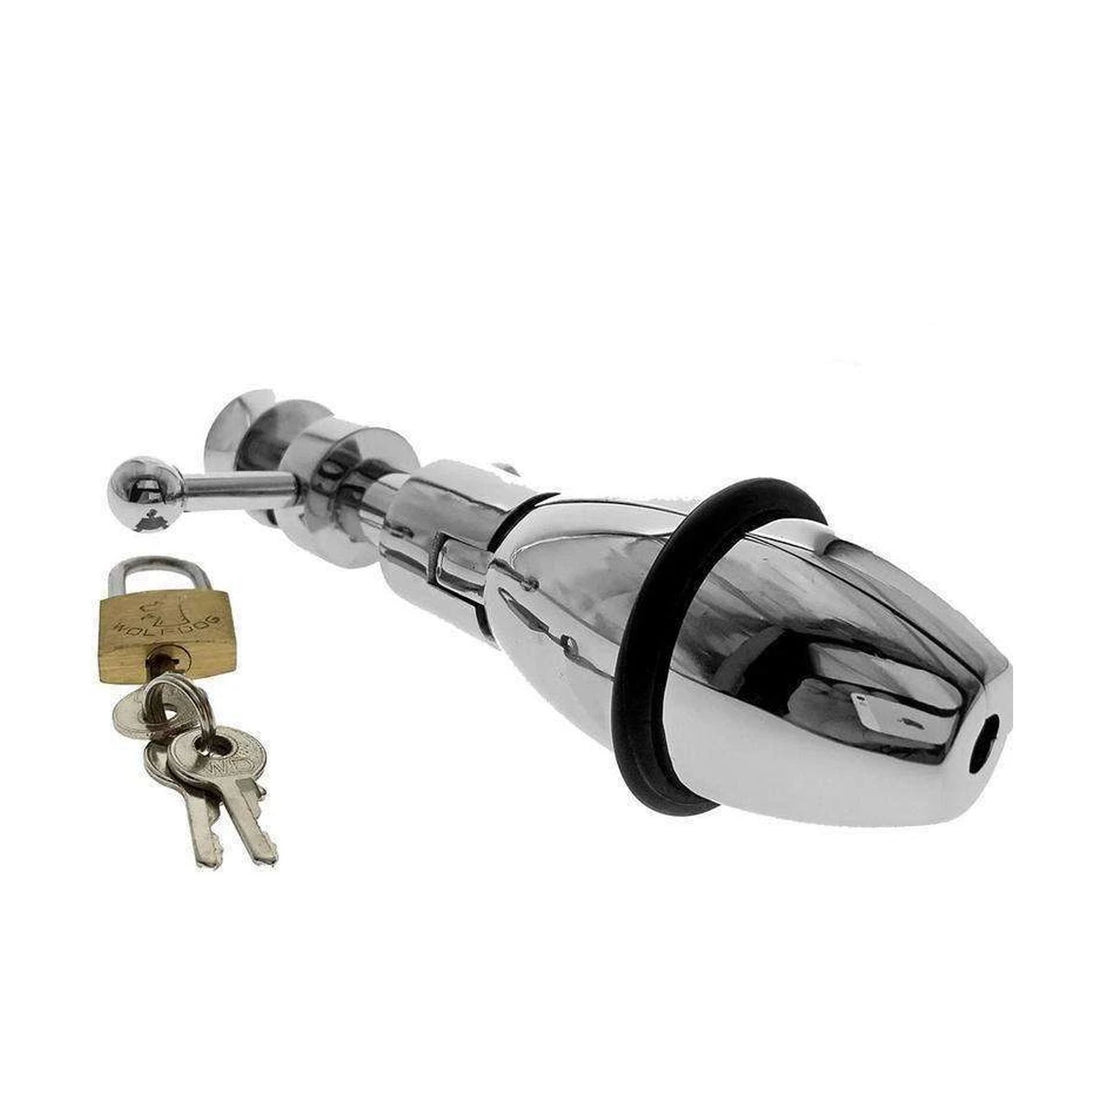 The Stretcher Locking Chastity Plug Lock The Cock Cage Product For Sale Image 7